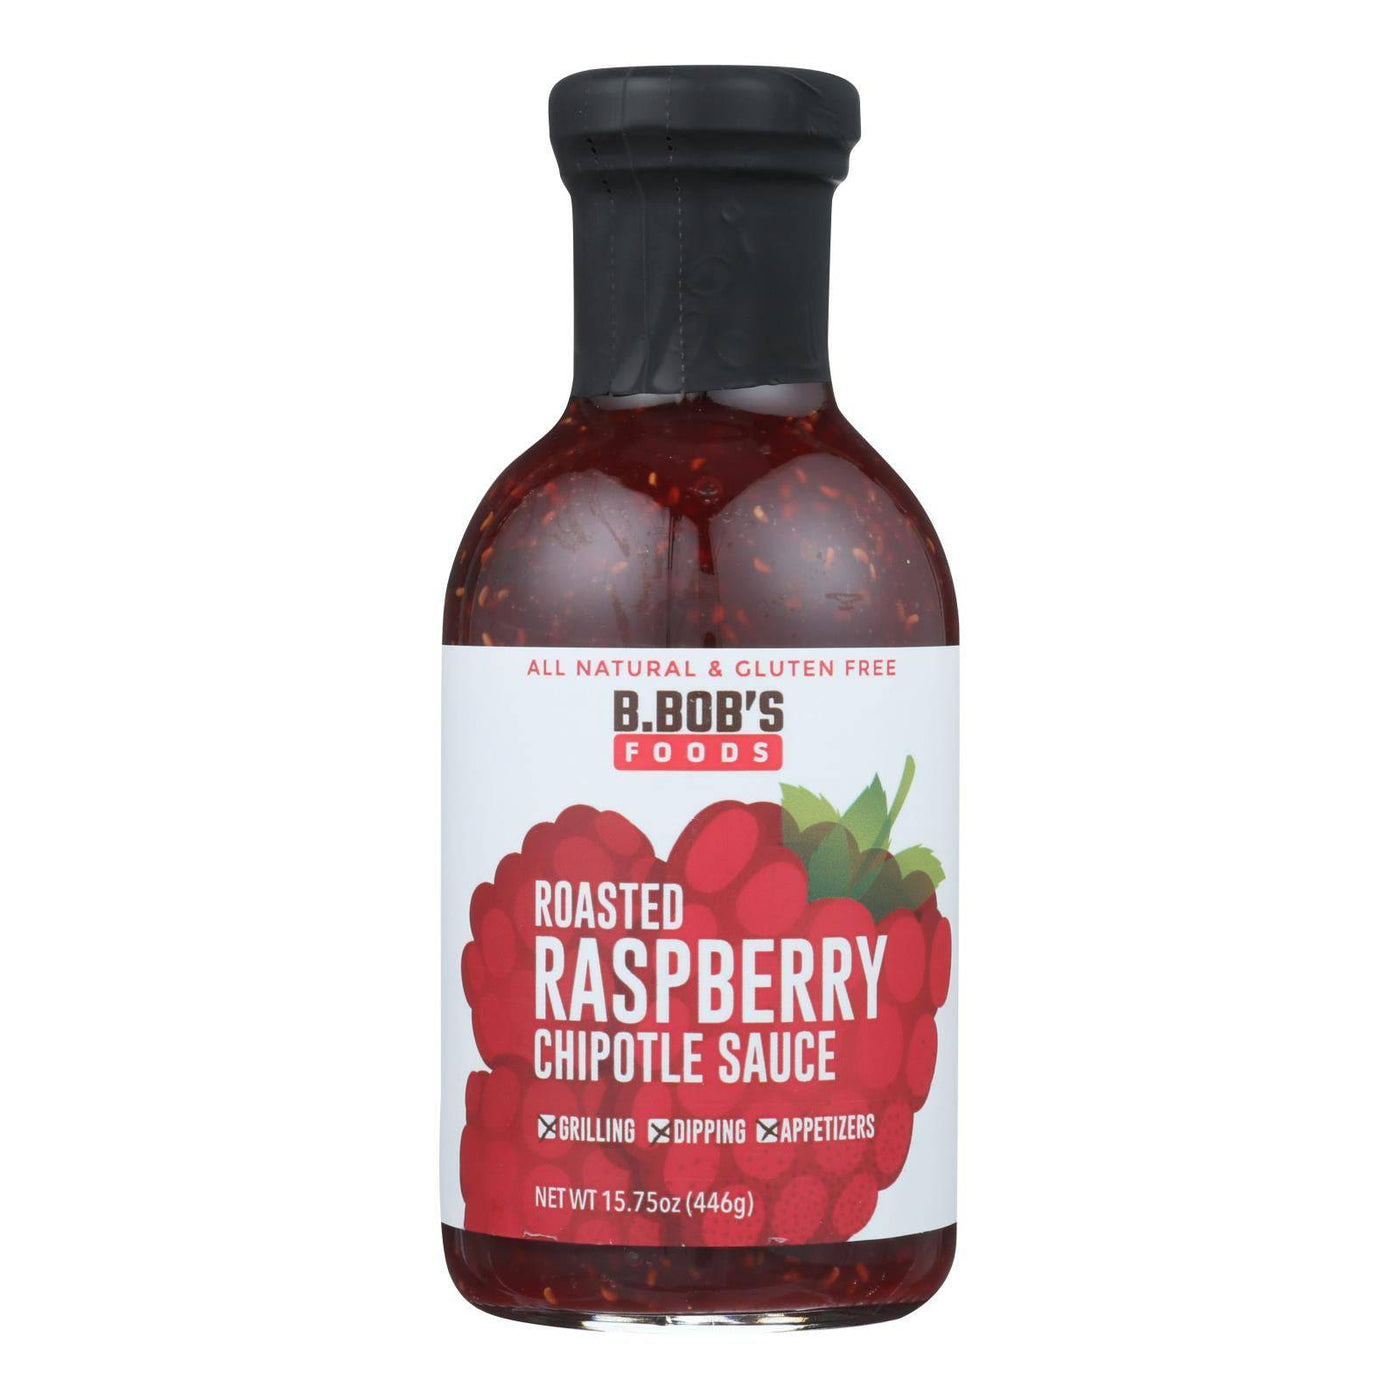 Bronco Bob's - Chipotle Sauce - Roasted Raspberry - Case Of 6 - 15.75 Fl Oz. | OnlyNaturals.us